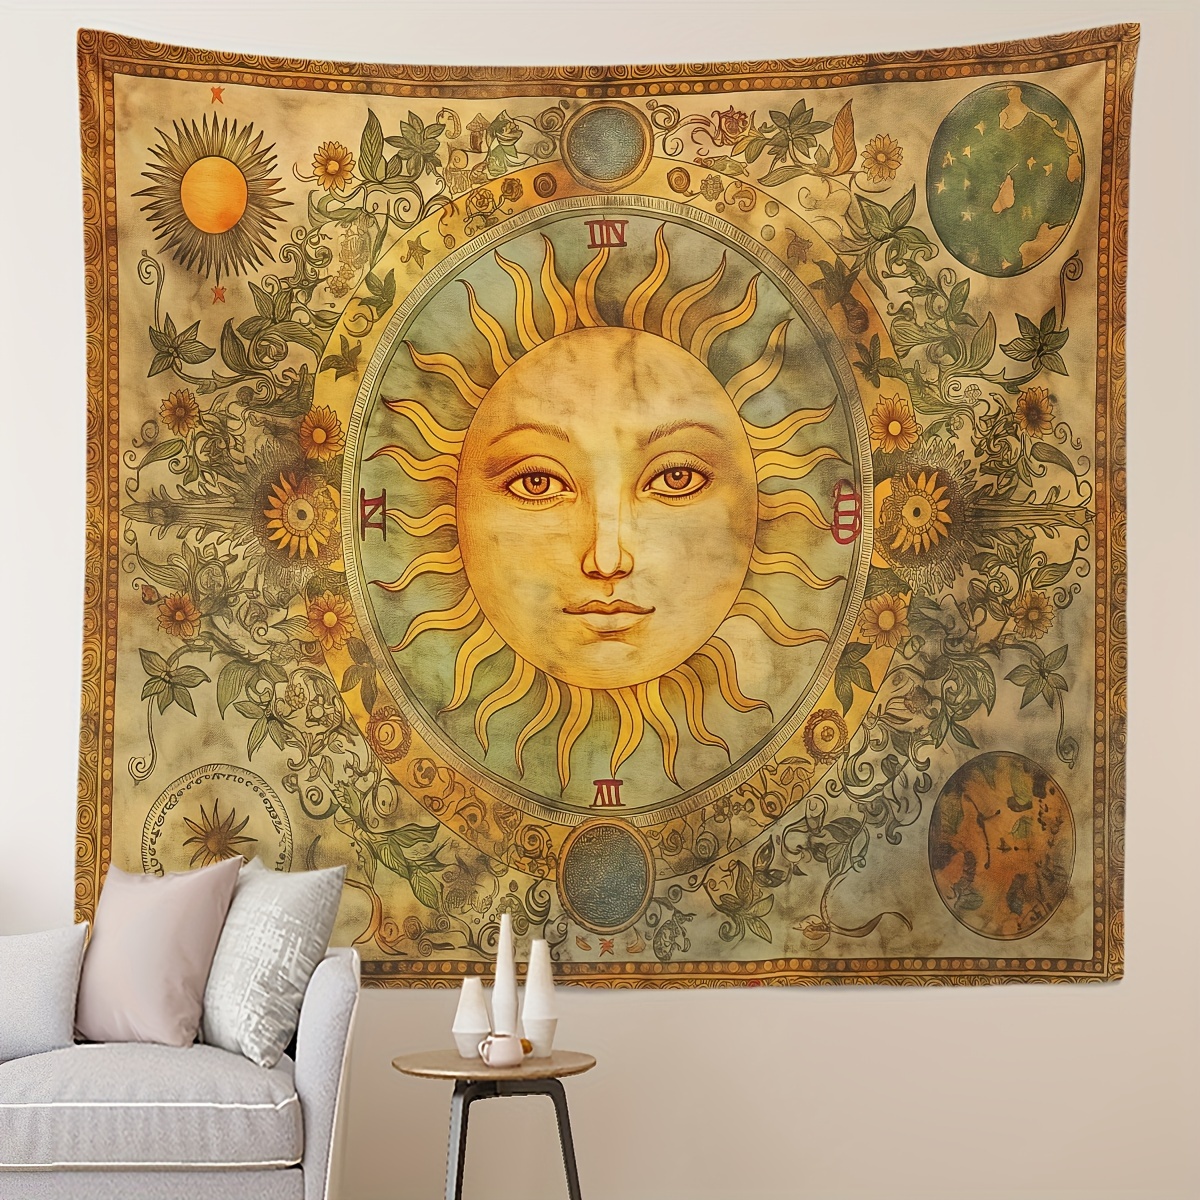 

Bohemian Sun & Mystic Flowers Tapestry - Psychedelic Floral Wall Hanging For Bedroom, Living Room, Dorm Decor - Soft Brushed Polyester, Horizontal Orientation